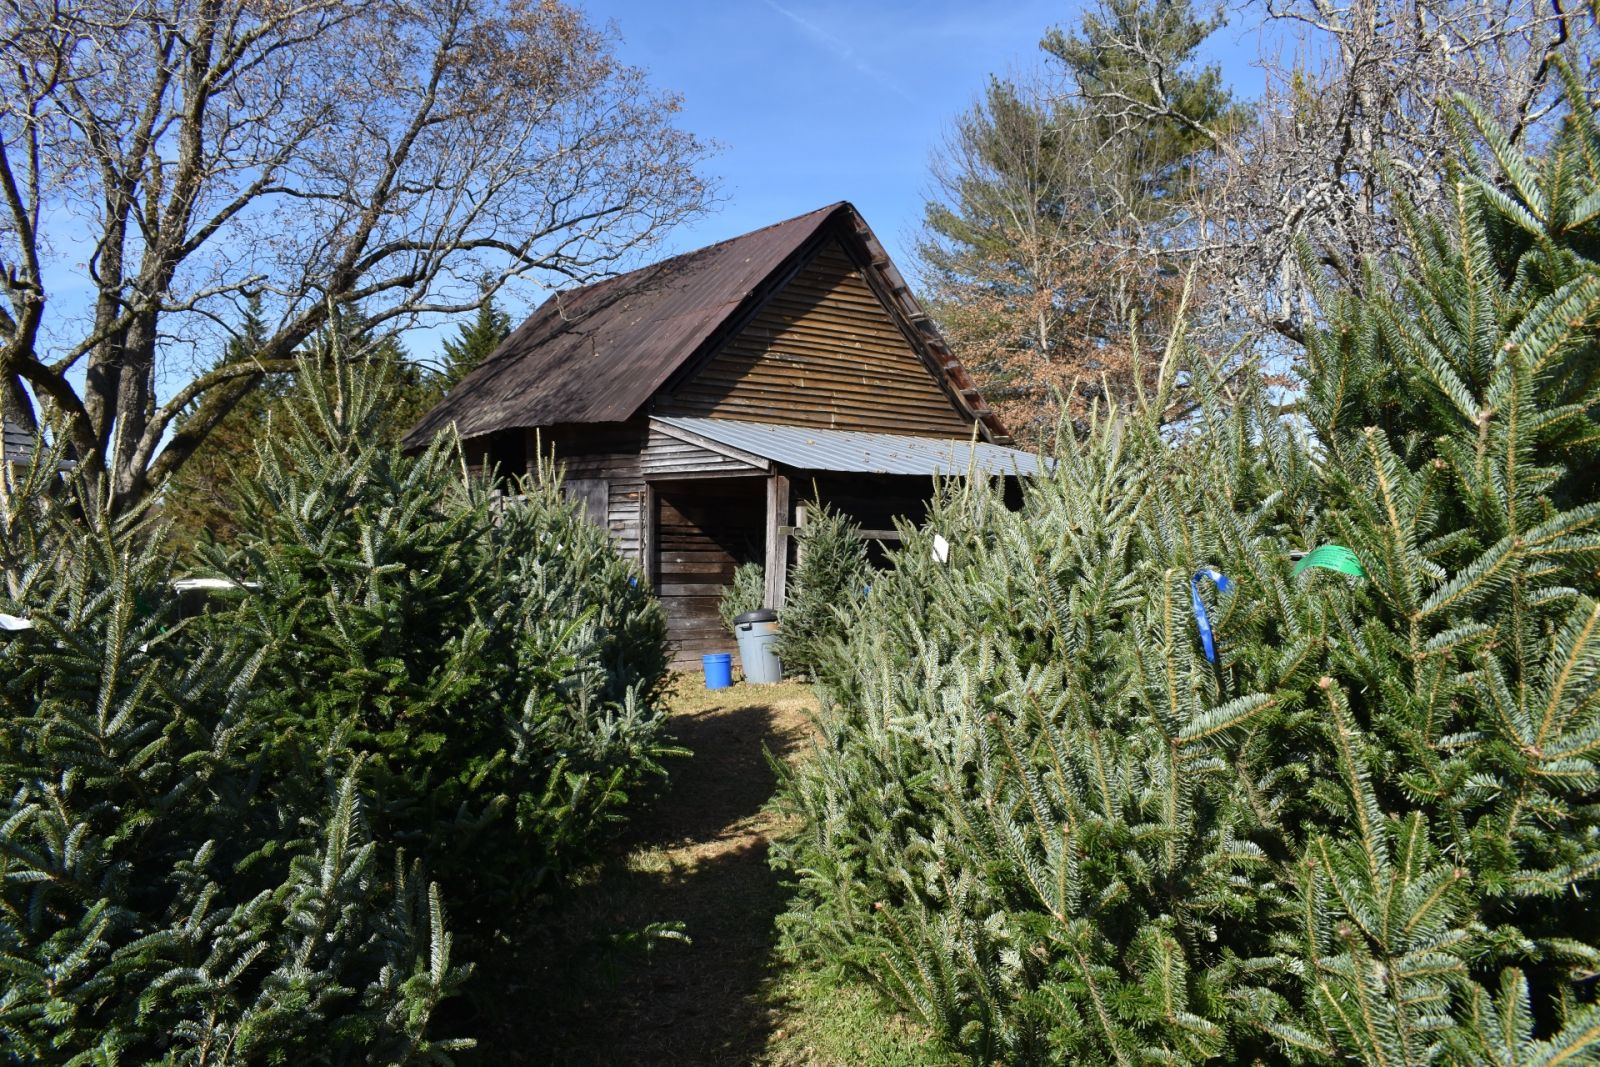 Merry Christmas Tree Farm's Stephen Steed was only able to get two-thirds of the Fraser fir trees he had ordered from his North Carolina supplier this year. (Photo/Molly Hulsey)